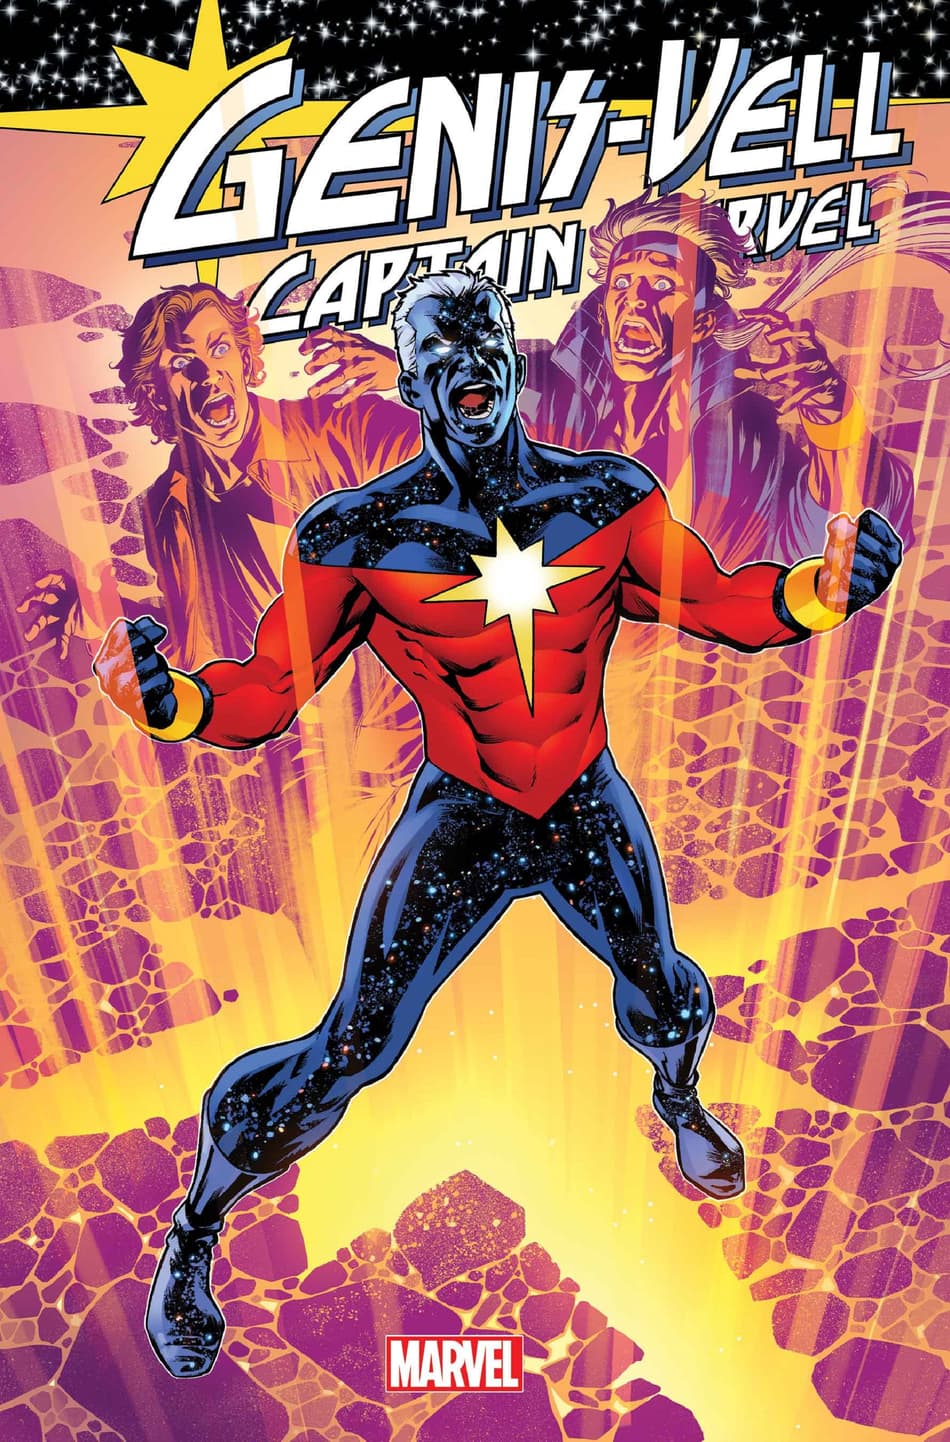 GENIS-VELL: CAPTAIN MARVEL (2022) #1 cover by Mike McKone.